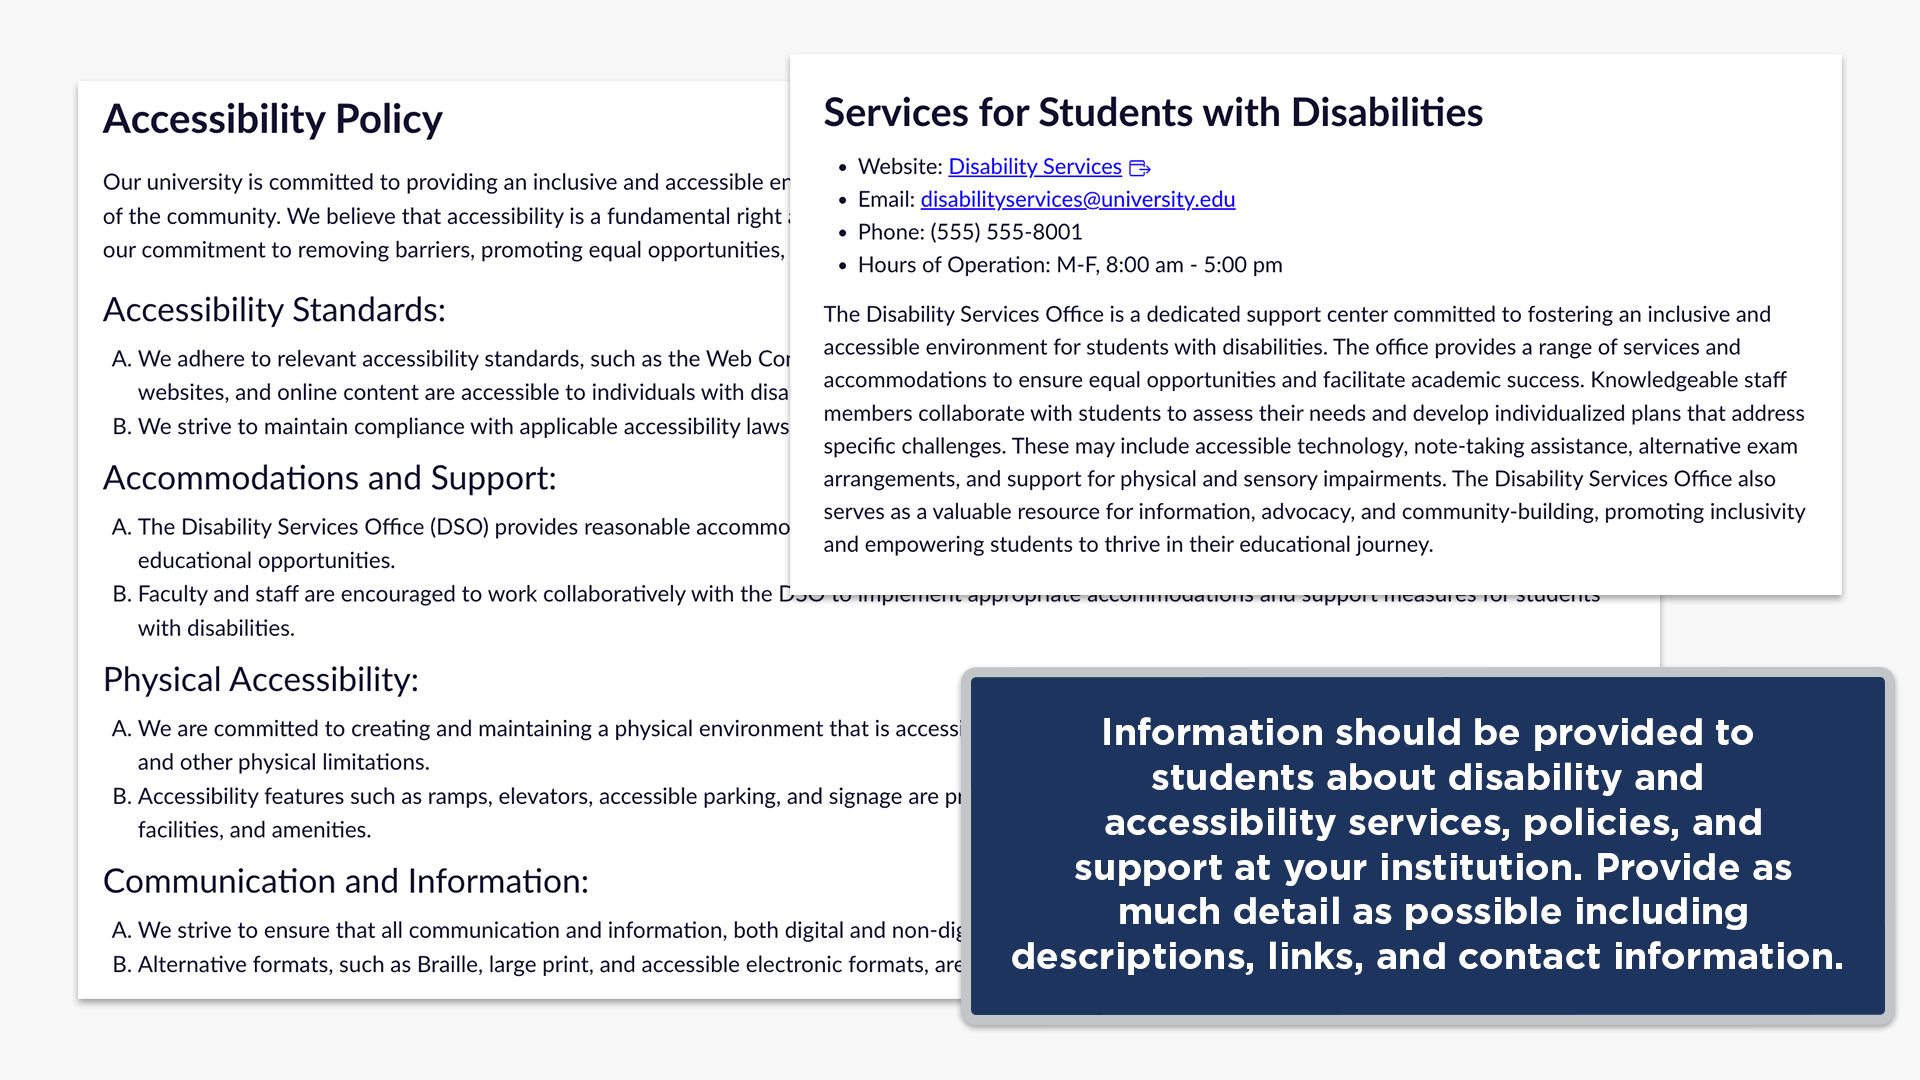 Information should be provided to students about disability and accessibility services, policies, andsupport at your institution. Provide asmuch detail as possible including descriptions, links, and contact information.